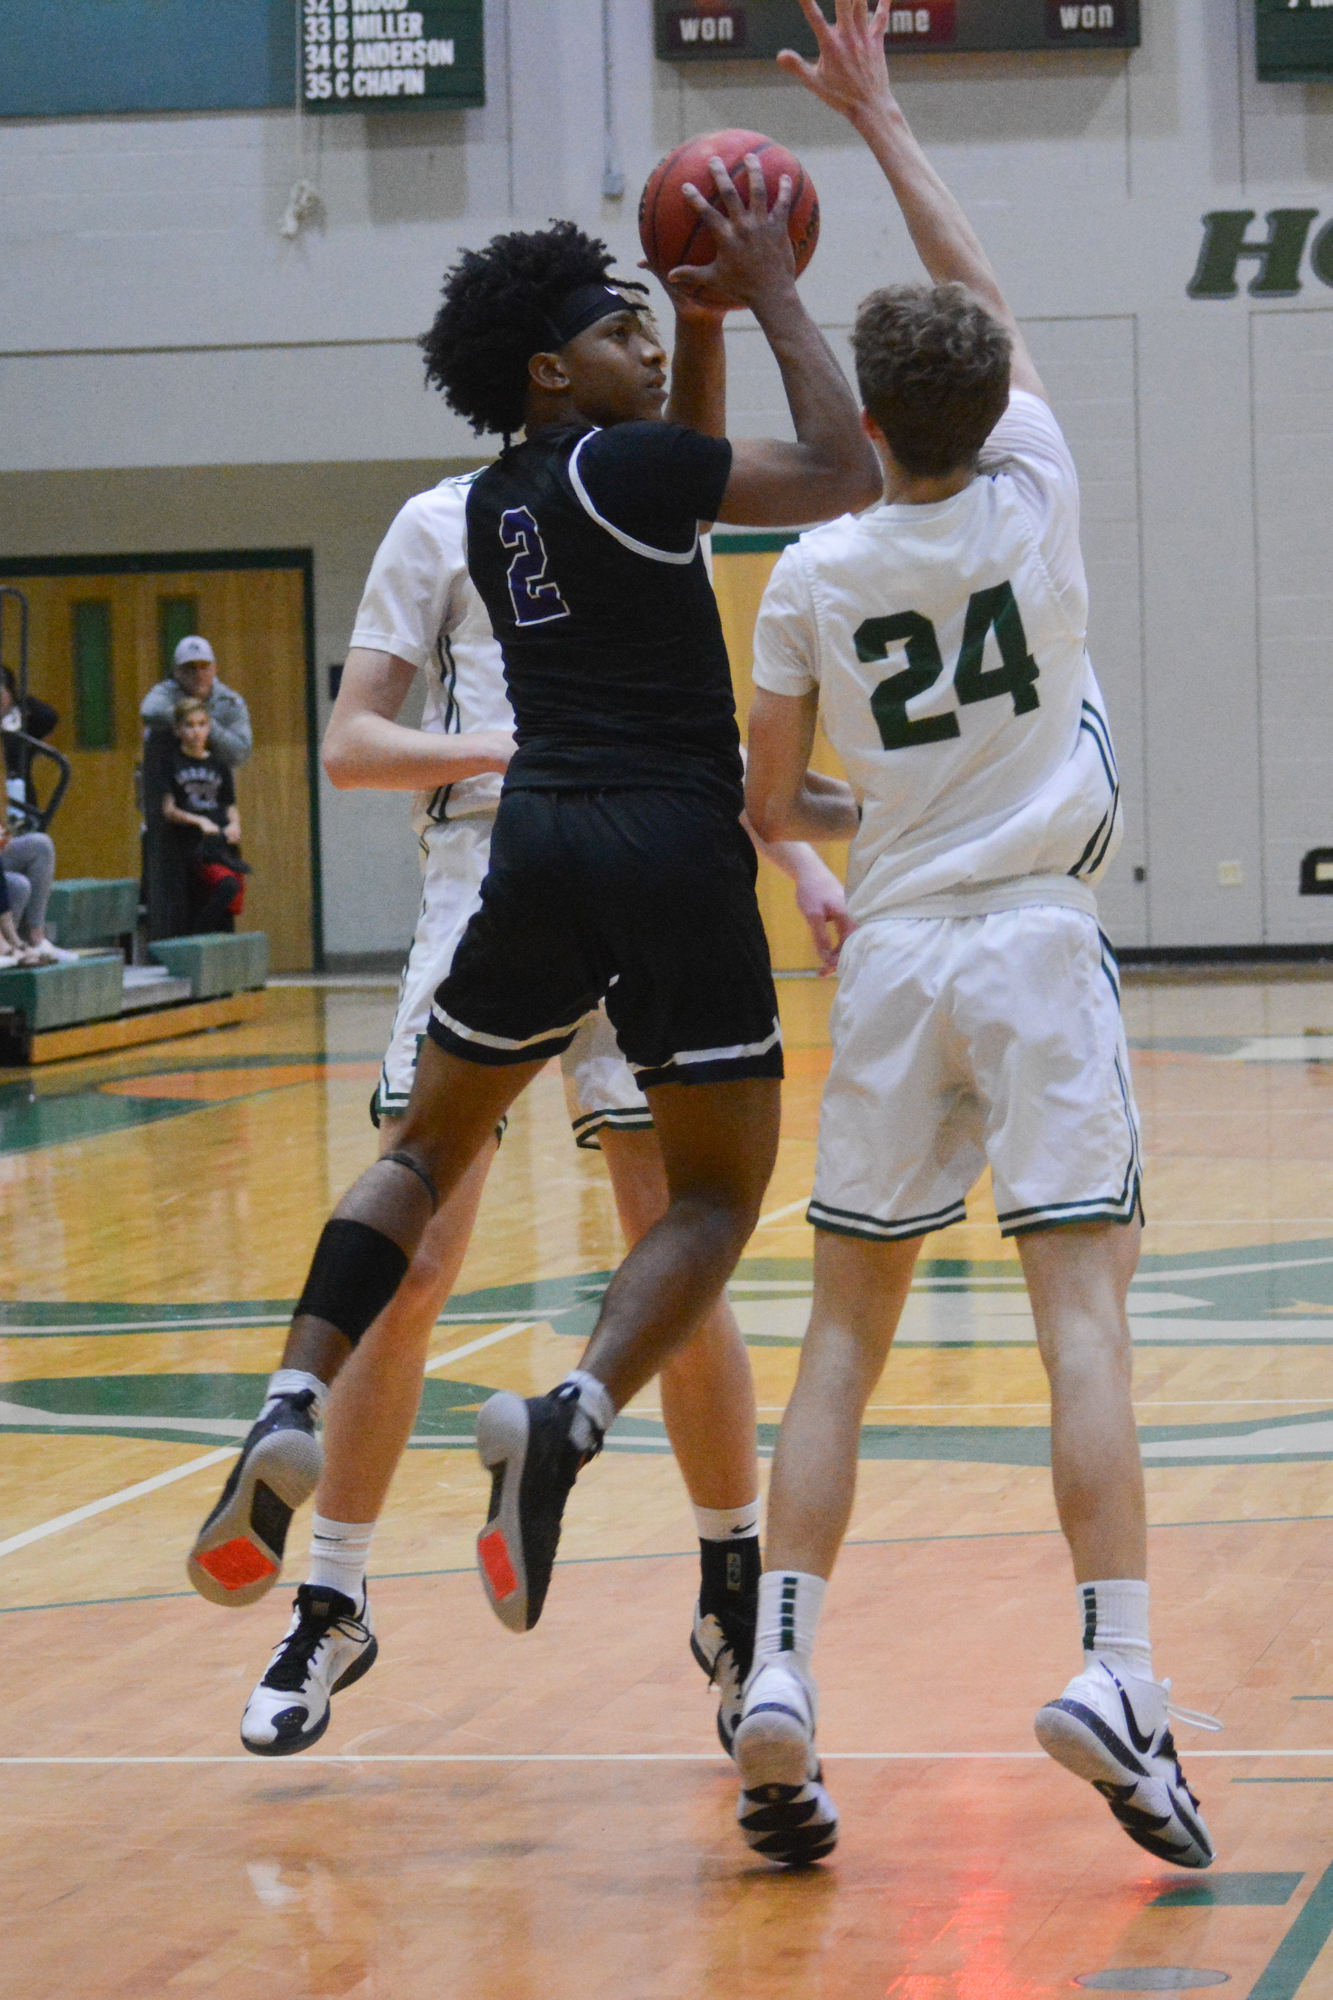 5. Booker guard Noah Dubose battles while getting off a layup. Tornadoes coach Markus Black urged his team to be more physical and they responded against Cocoa.